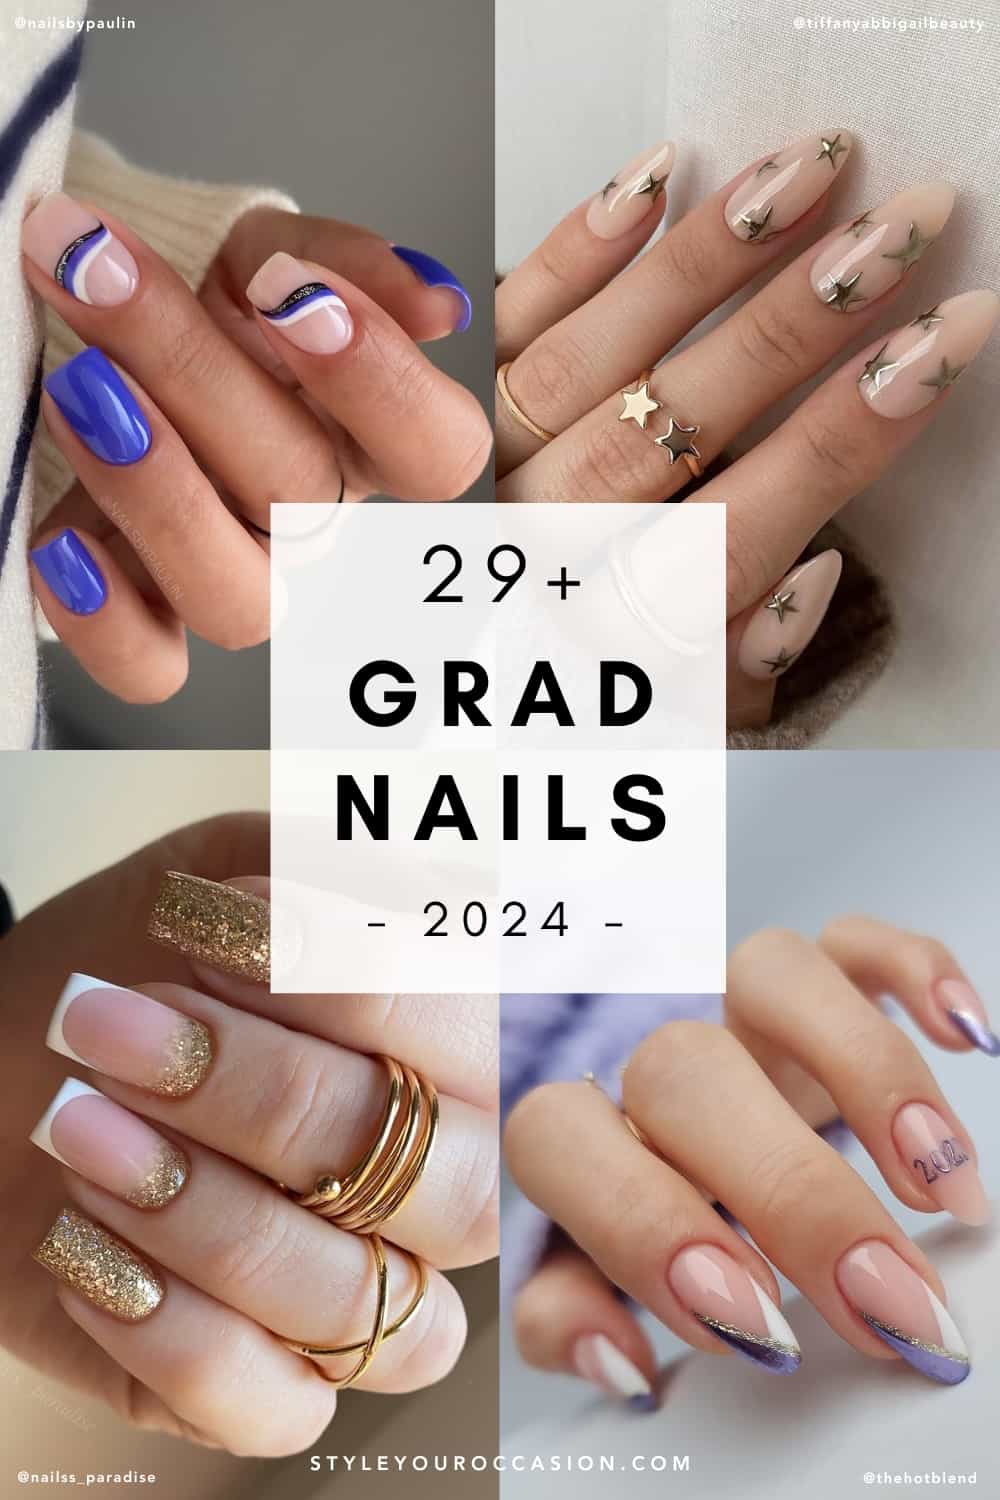 collage of four hands with graduation nail designs including royal blue, silver, and gold